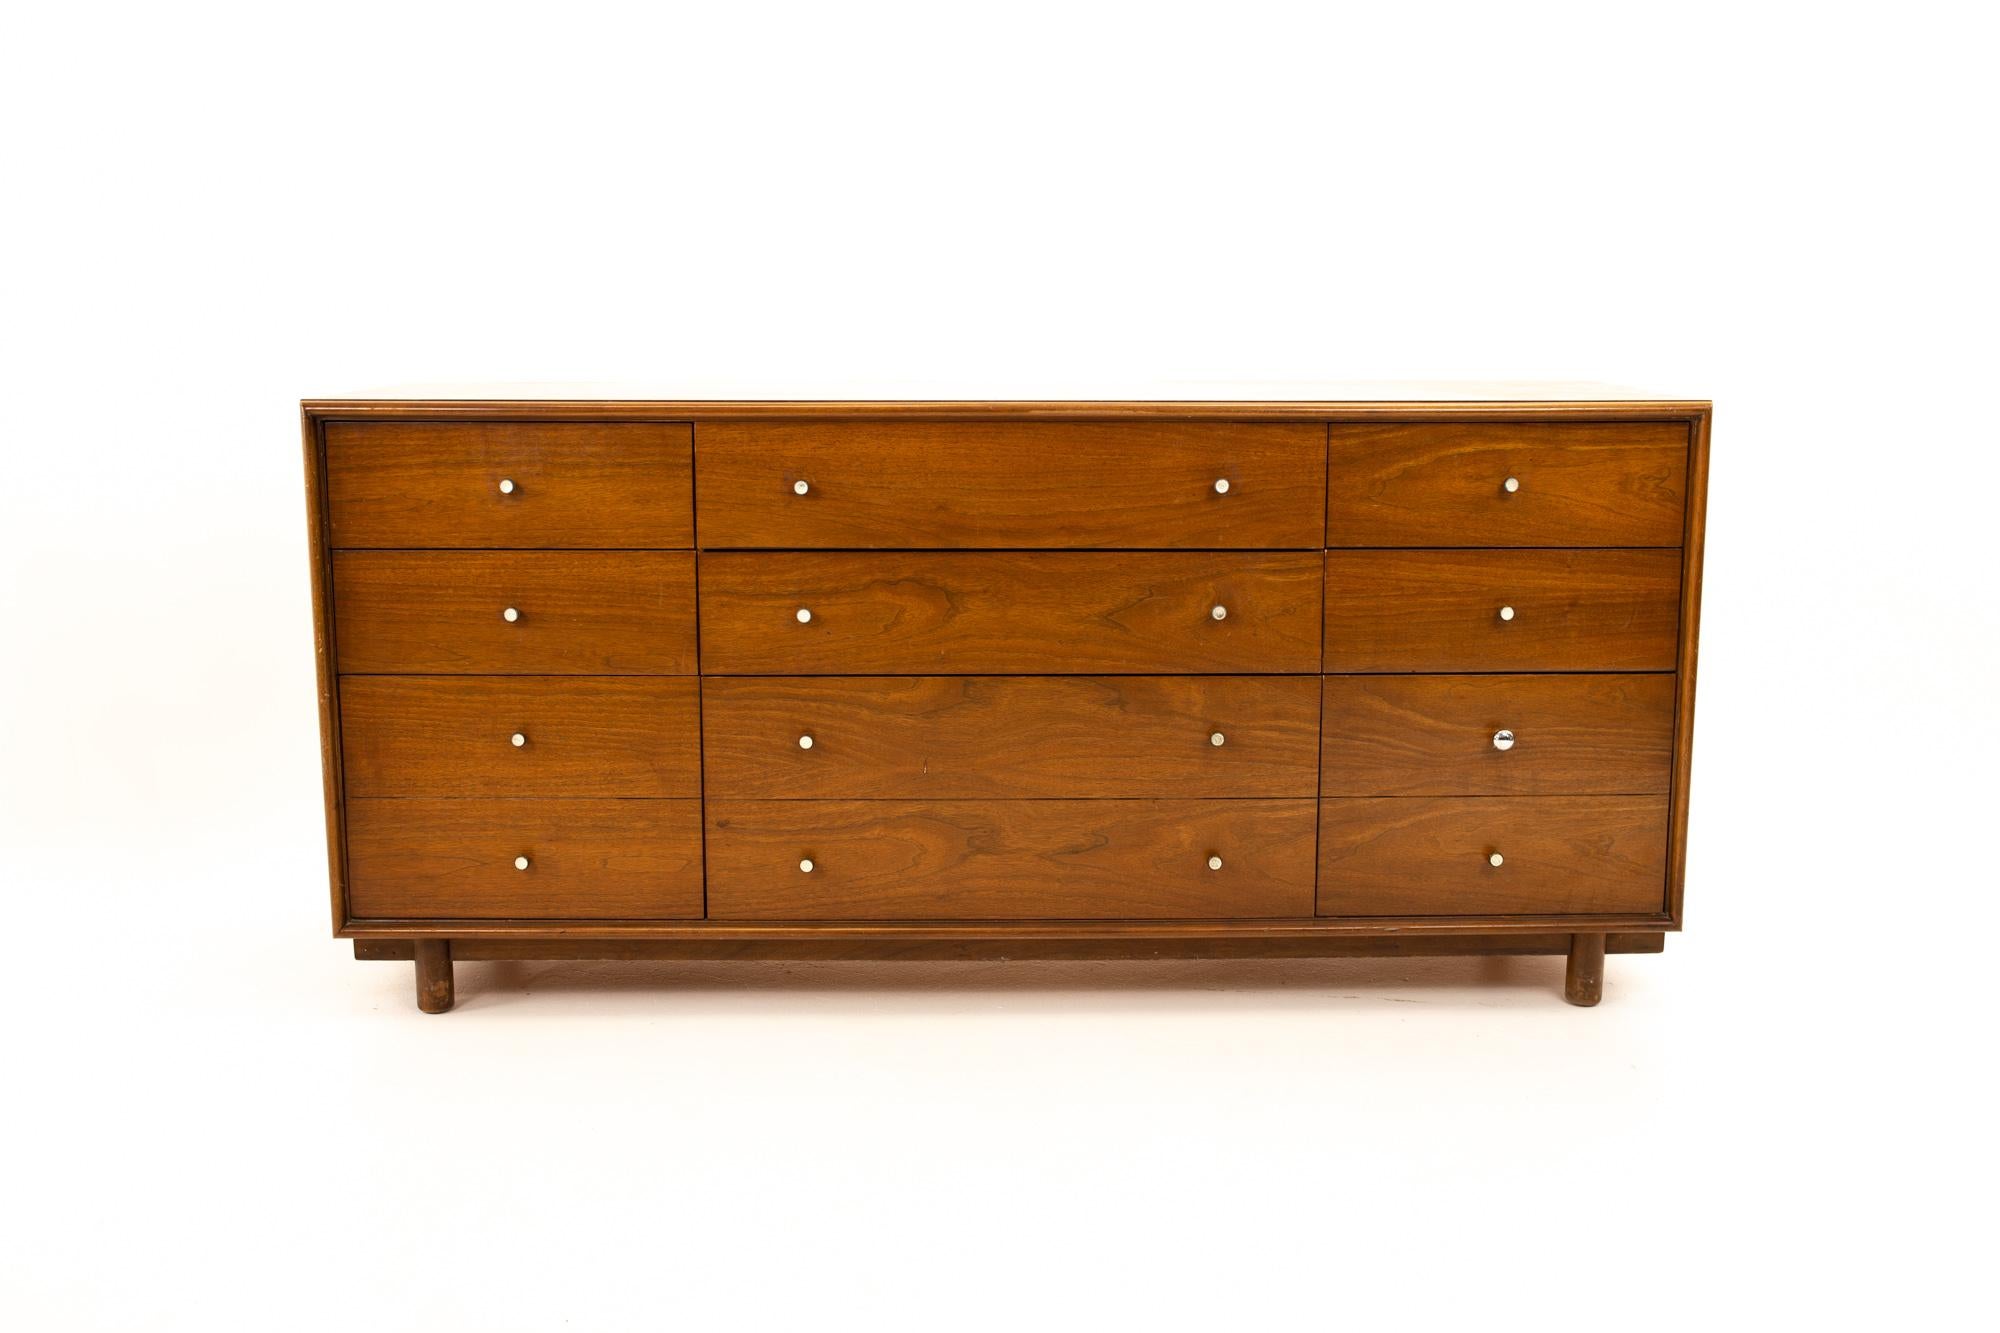 Ramseur Mid Century walnut 12-drawer lowboy dresser
Dresser measures: 66.5 wide x 19.5 deep x 30.5 high

All pieces of furniture can be had in what we call restored vintage condition. That means the piece is restored upon purchase so it’s free of